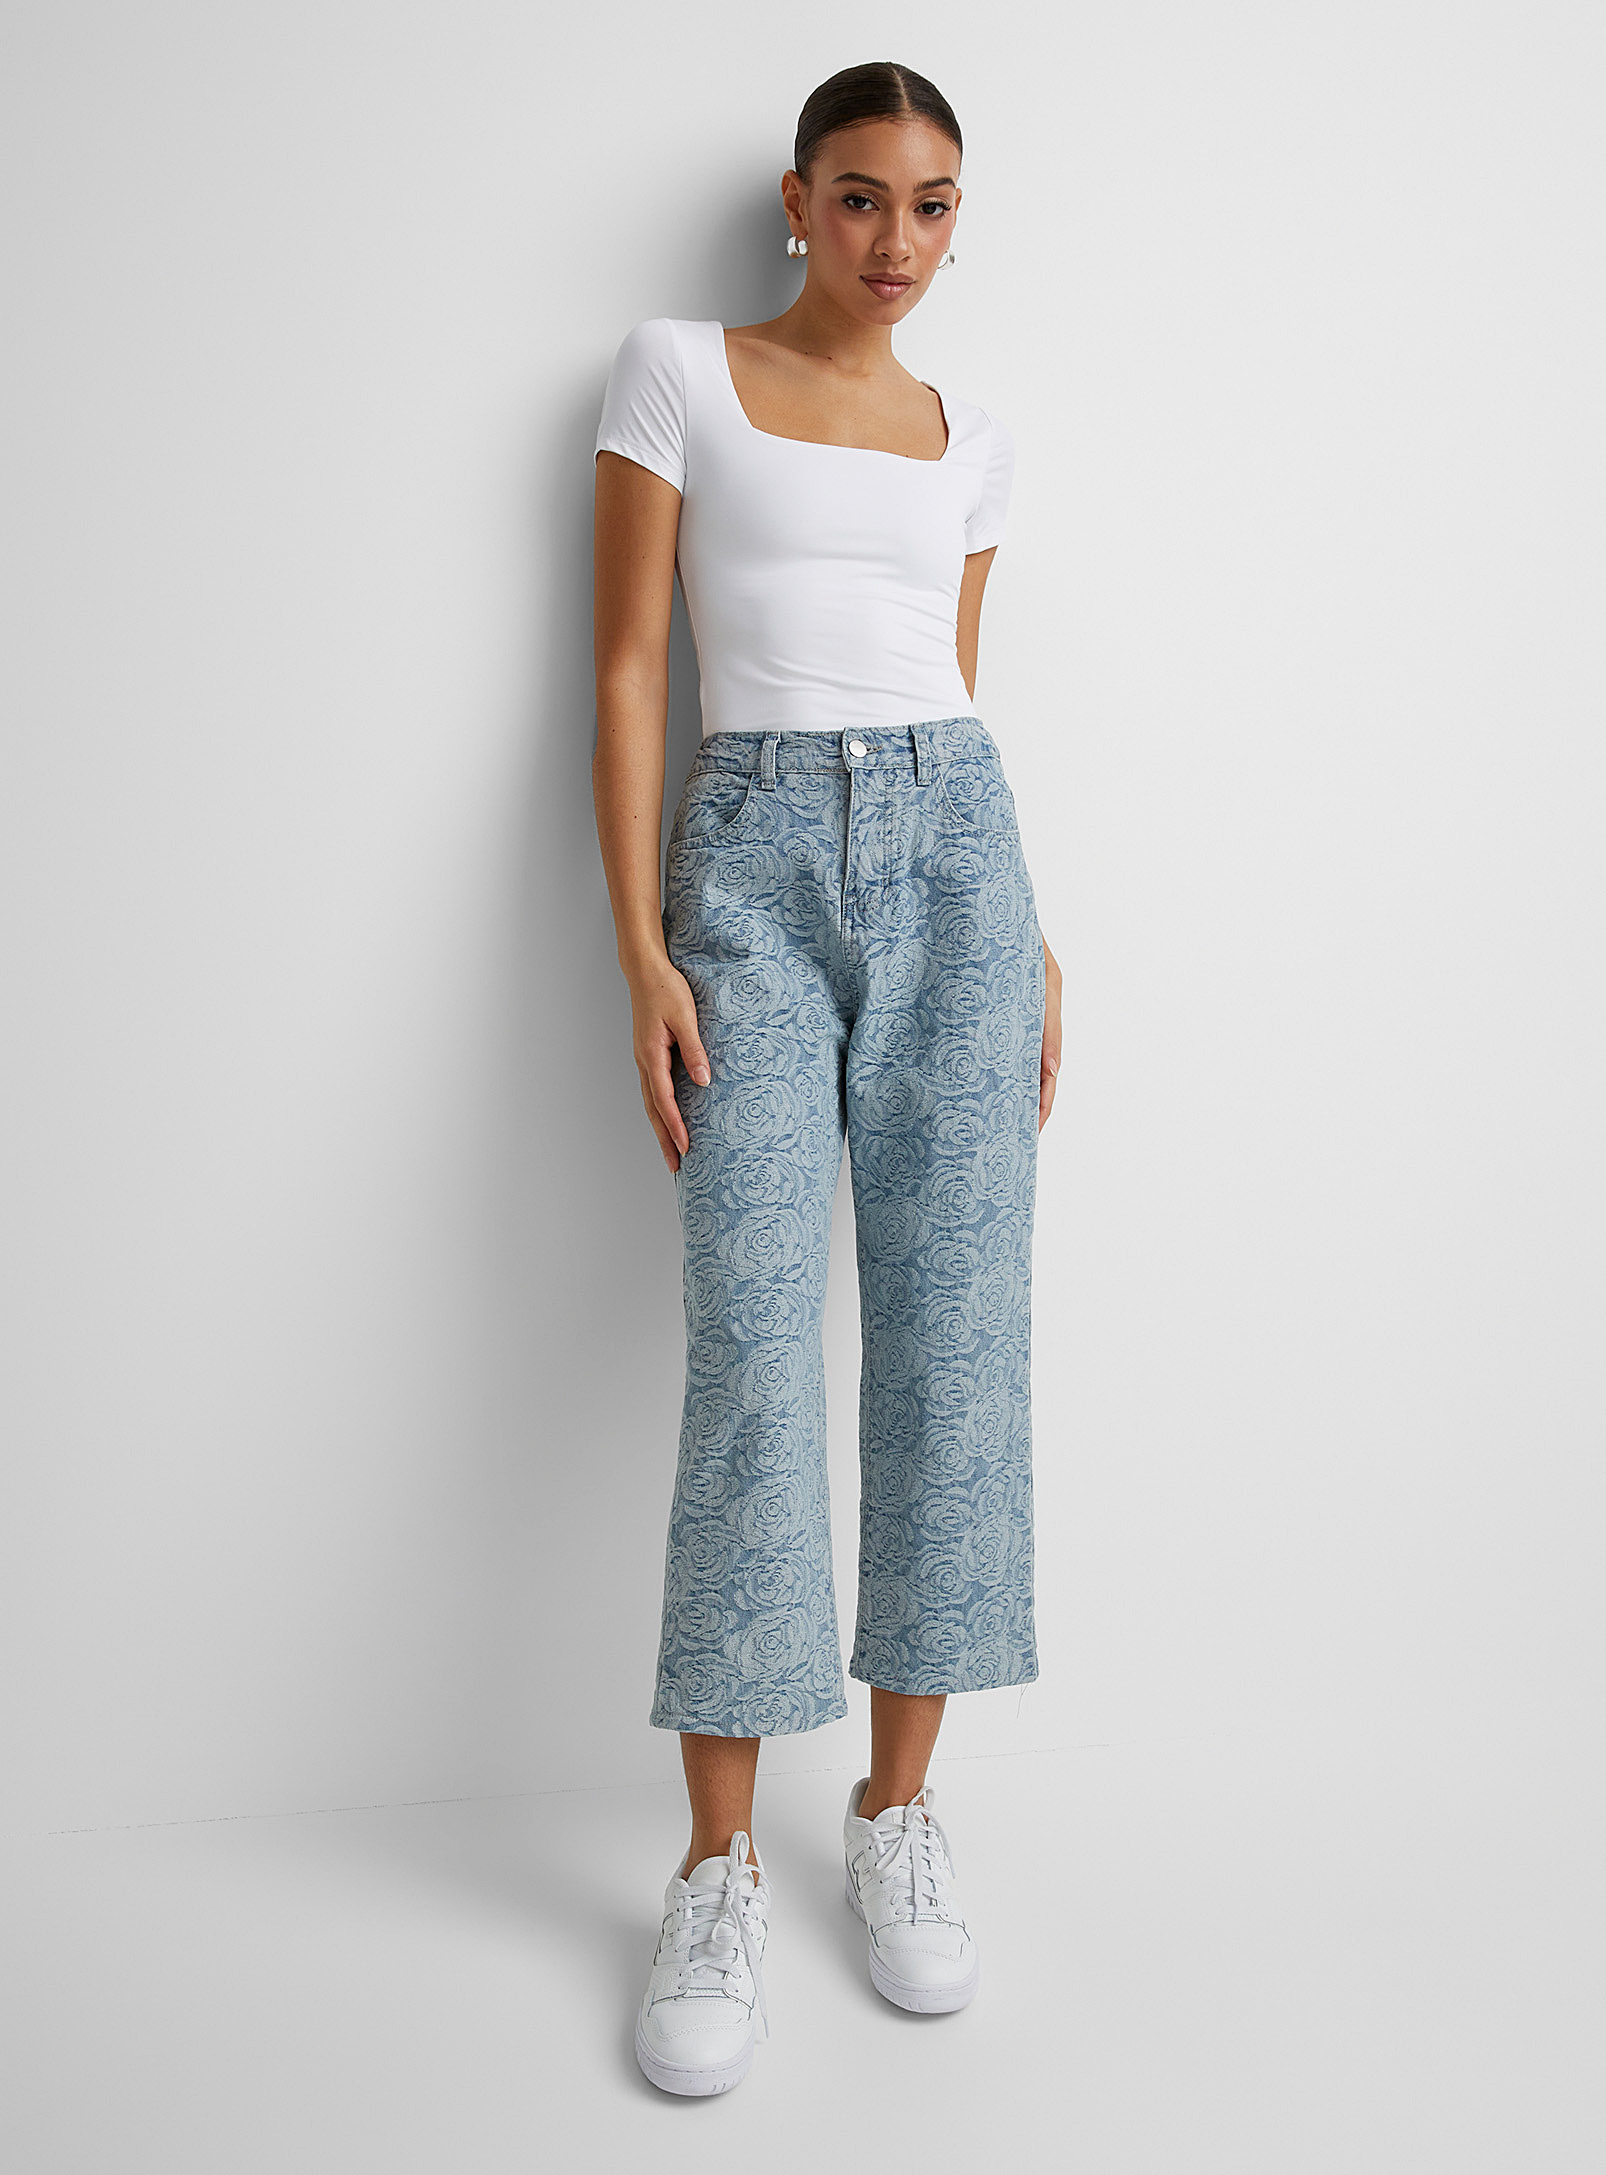 Icone Rose Bouquet Jean In Patterned Blue